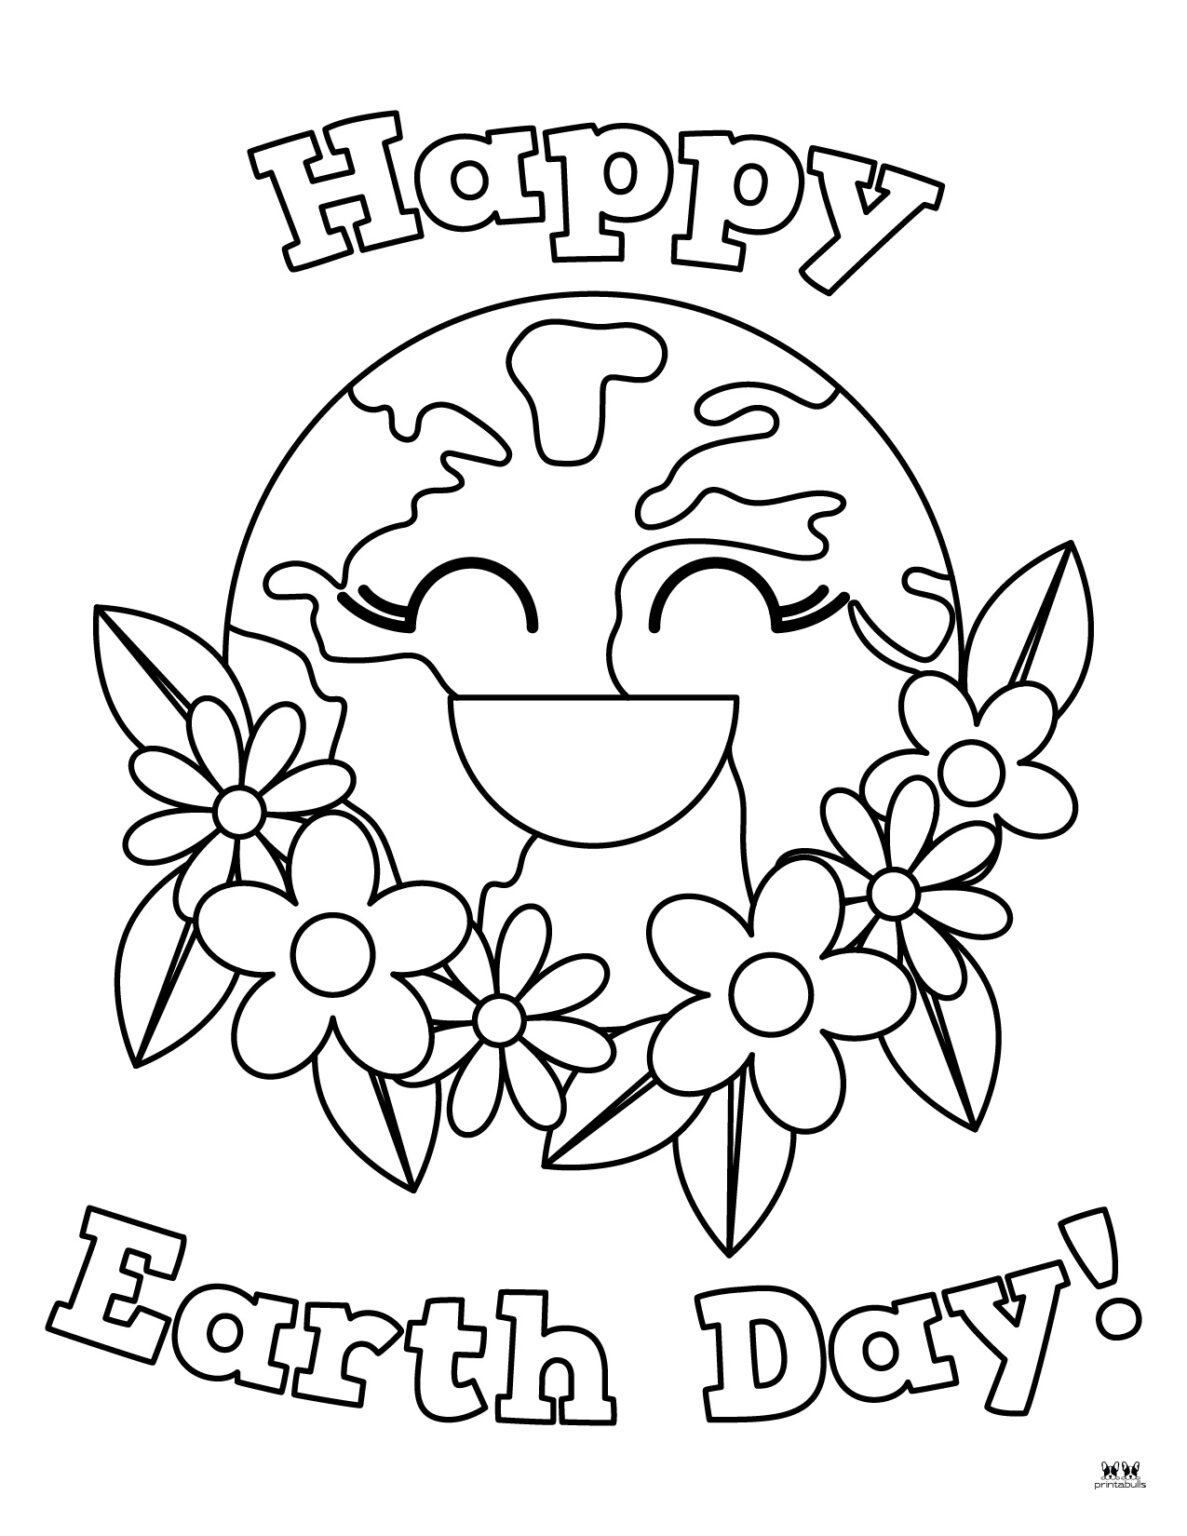 Earth Day Coloring Pages - 25 FREE Pages | Printabulls